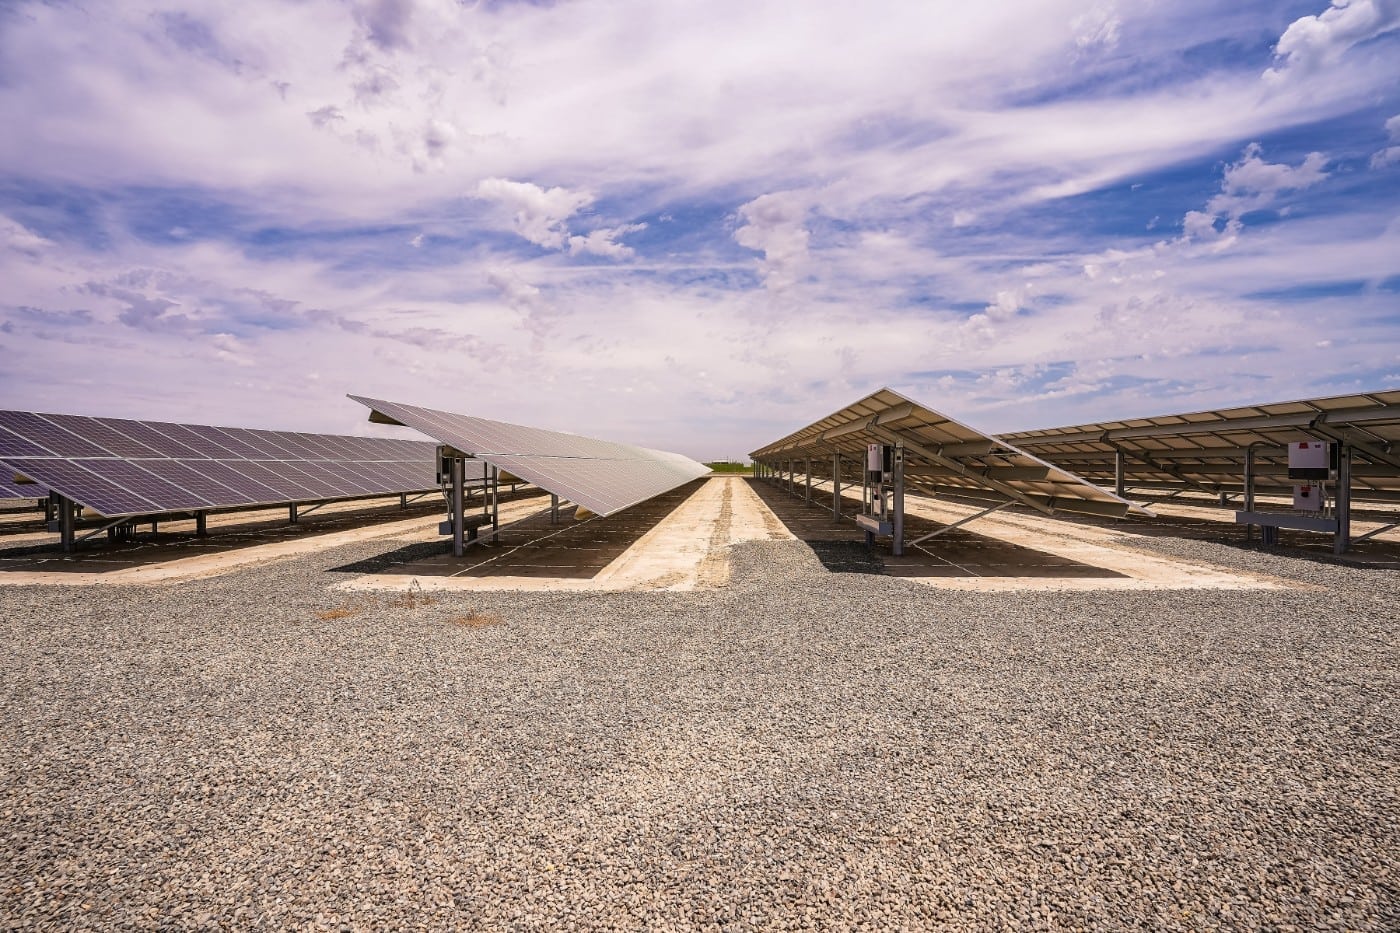 Ground view of rows of ground-mounted solar panels making up the solar farm at Johann Dairy in Fresno, California.